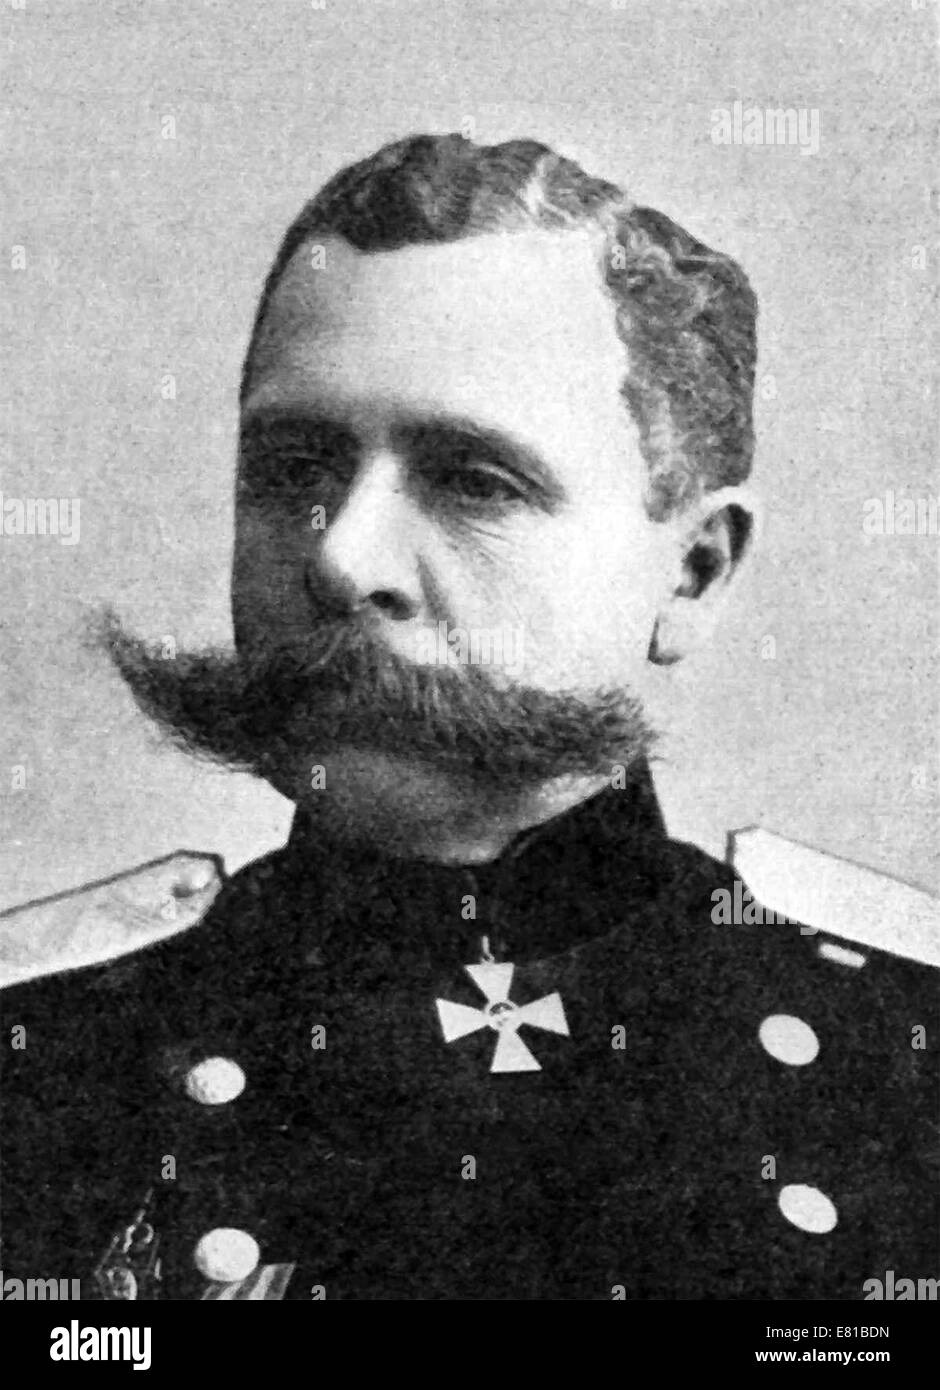 Paul von Rennenkampf, Russian general who served in the Imperial Russian Army for over 40 years, including during World War I. Stock Photo